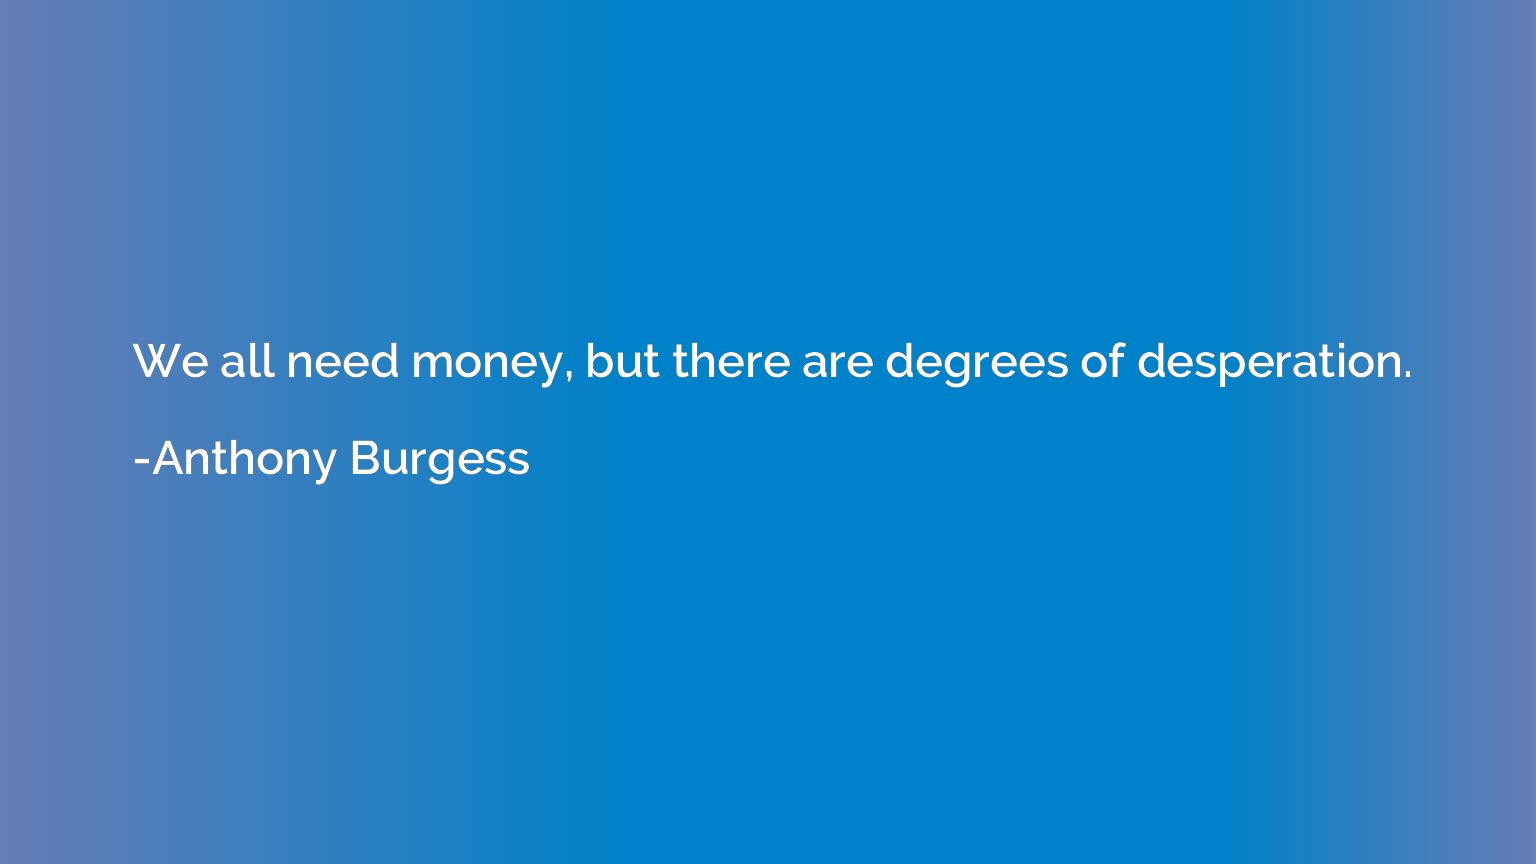 We all need money, but there are degrees of desperation.